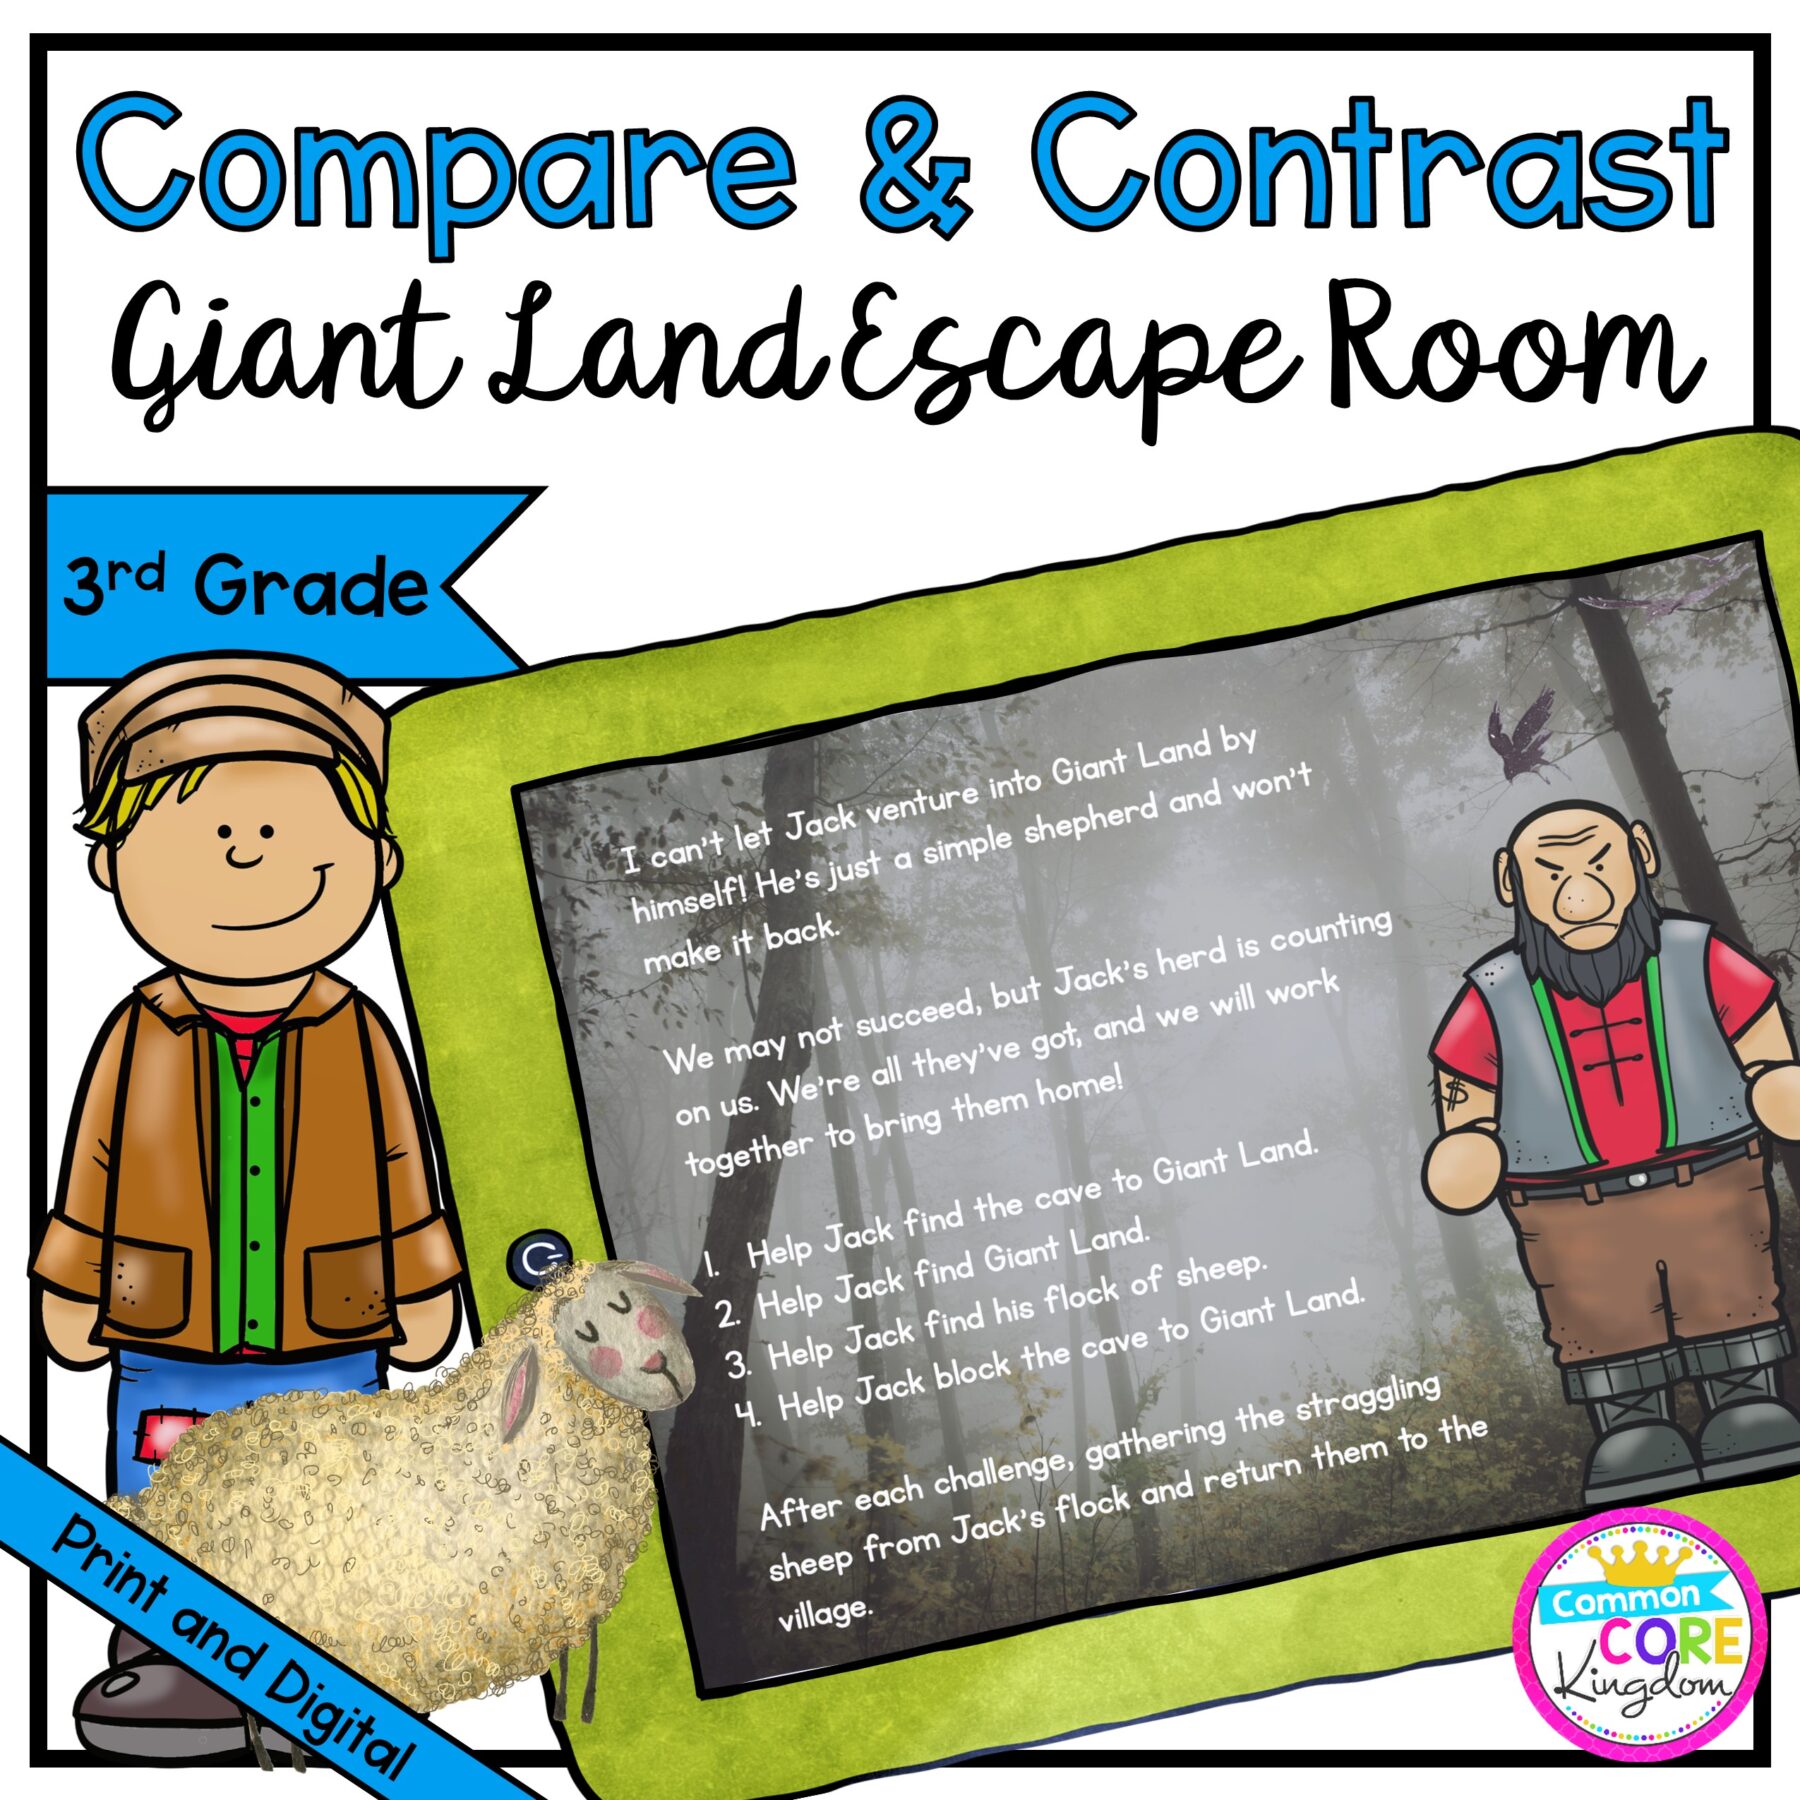 Compare & Contrast Fiction Giant Land Escape Room - 3rd Grade in Digital & Printable Format